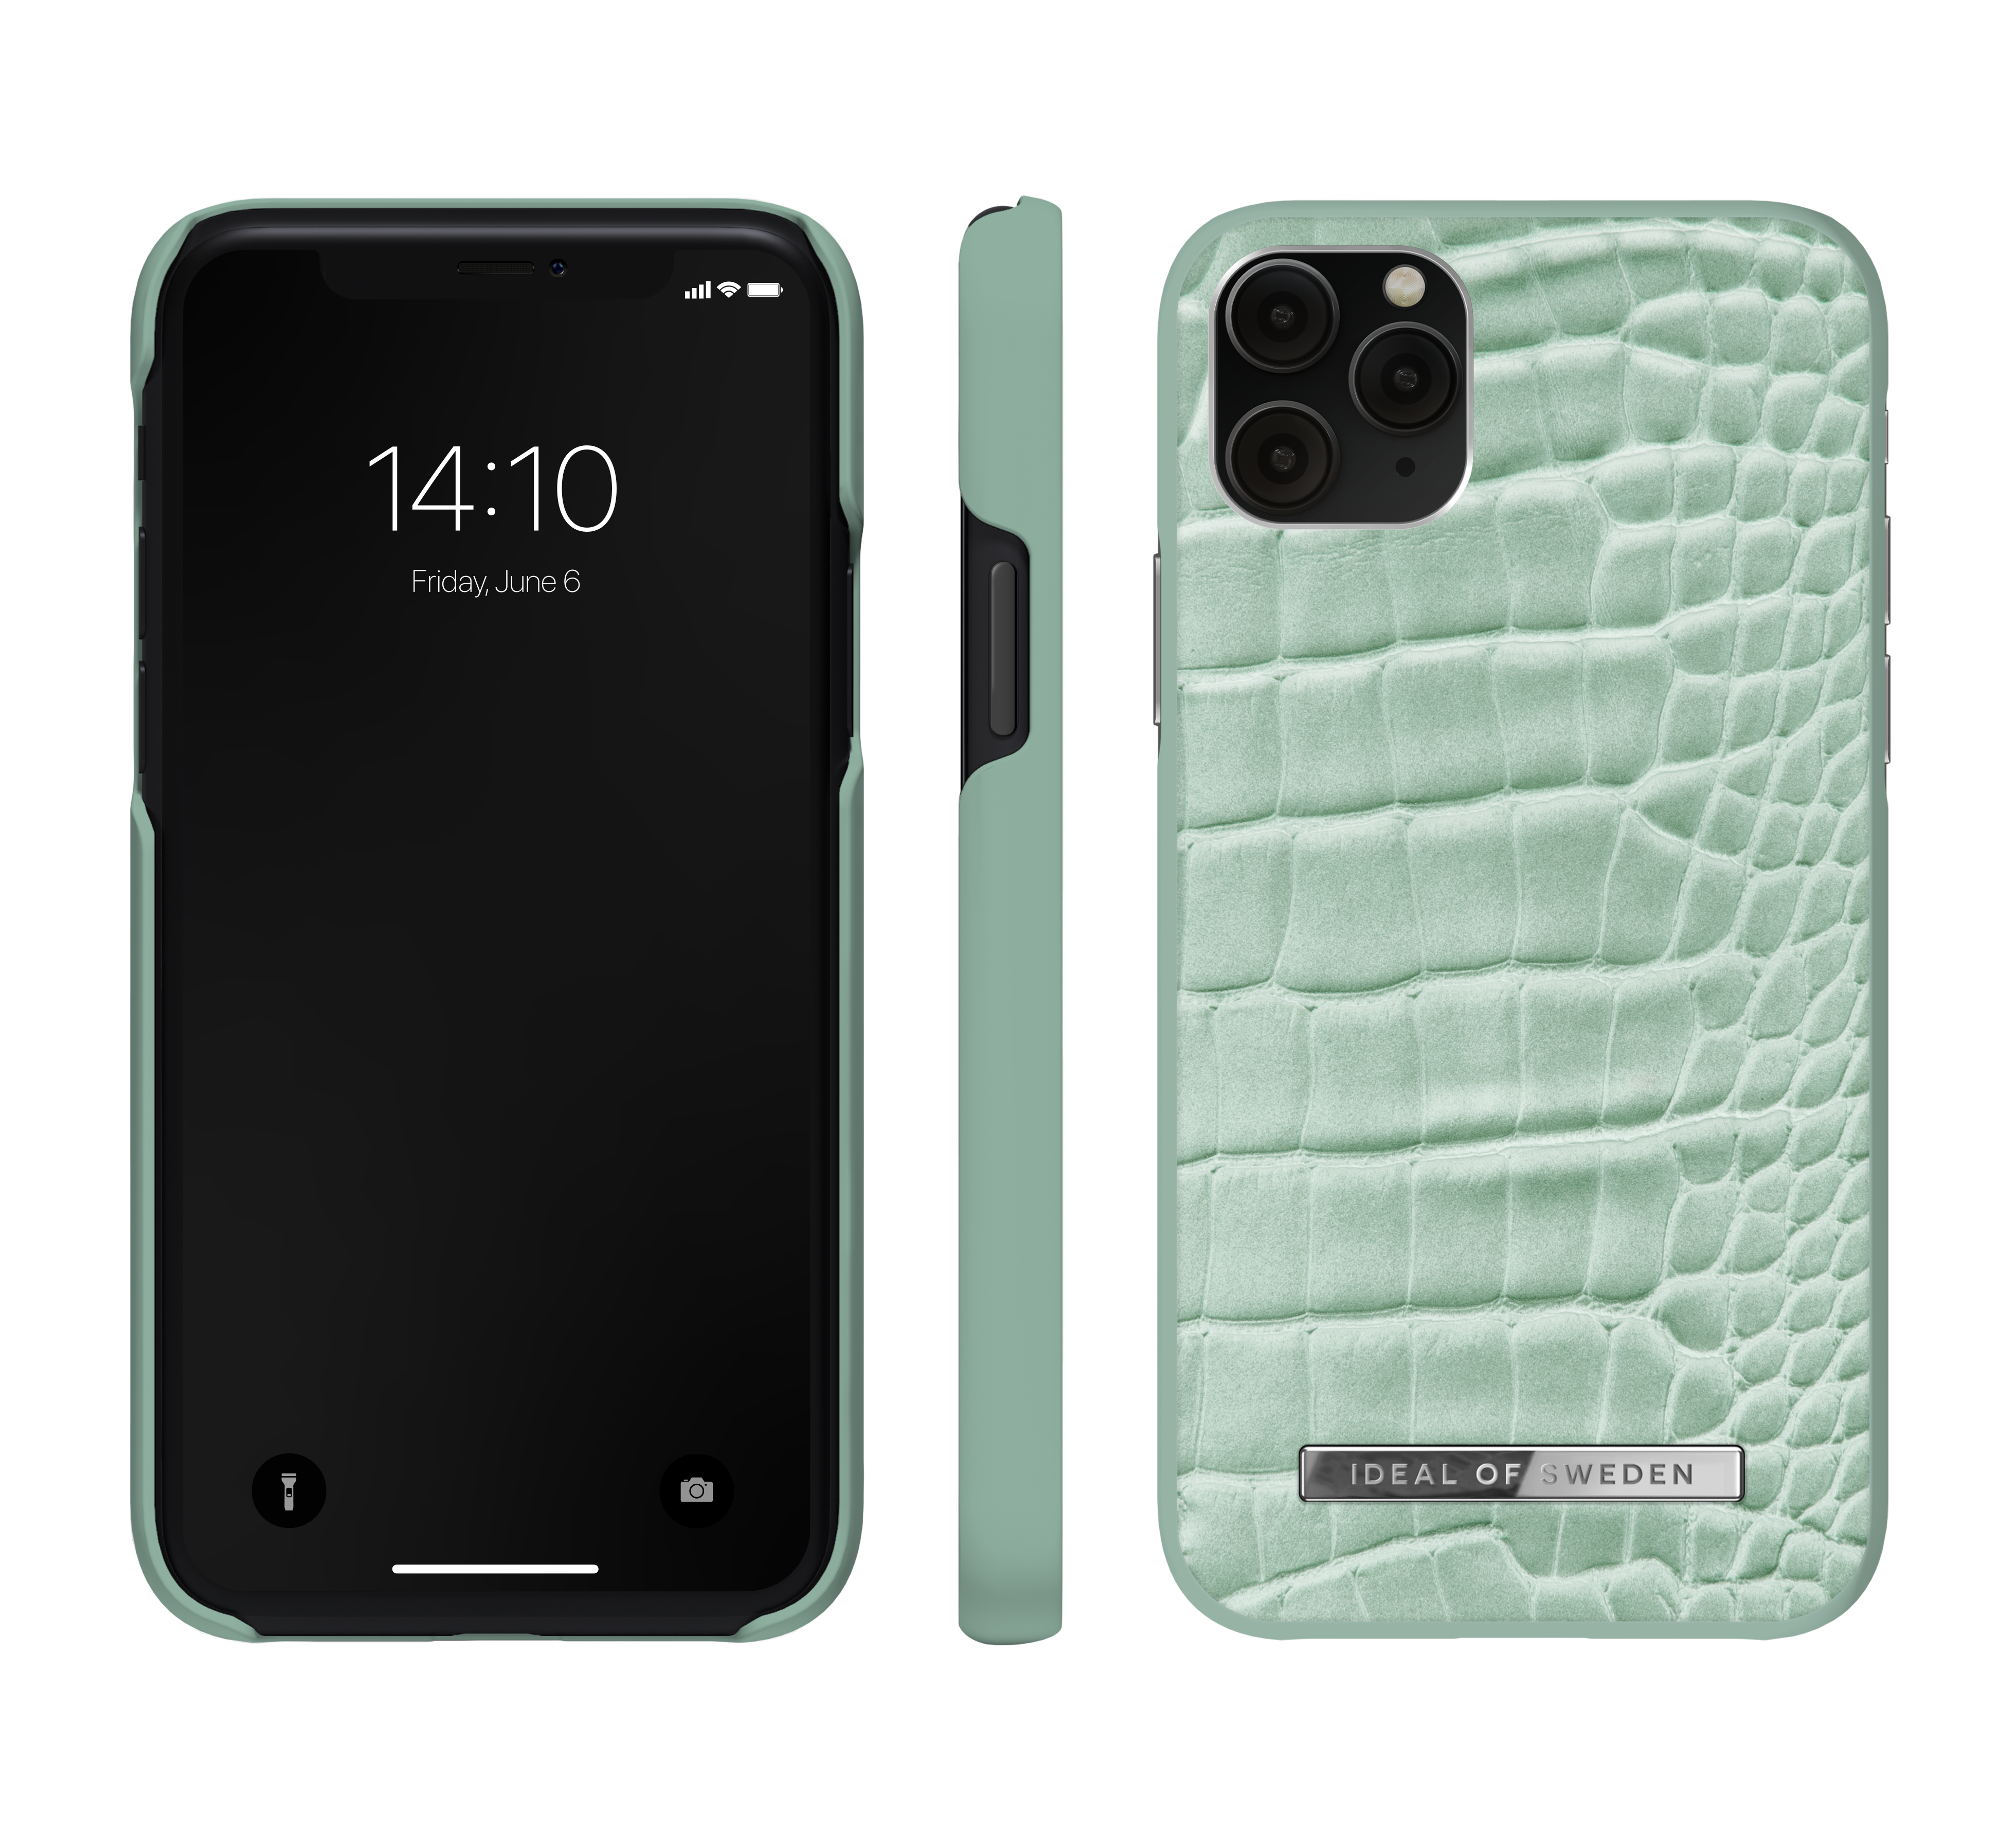 IDEAL OF Croco Pro, SWEDEN iPhone Mint X, iPhone IDACSS21-I1958-261, Backcover, XS, Apple, 11 iPhone